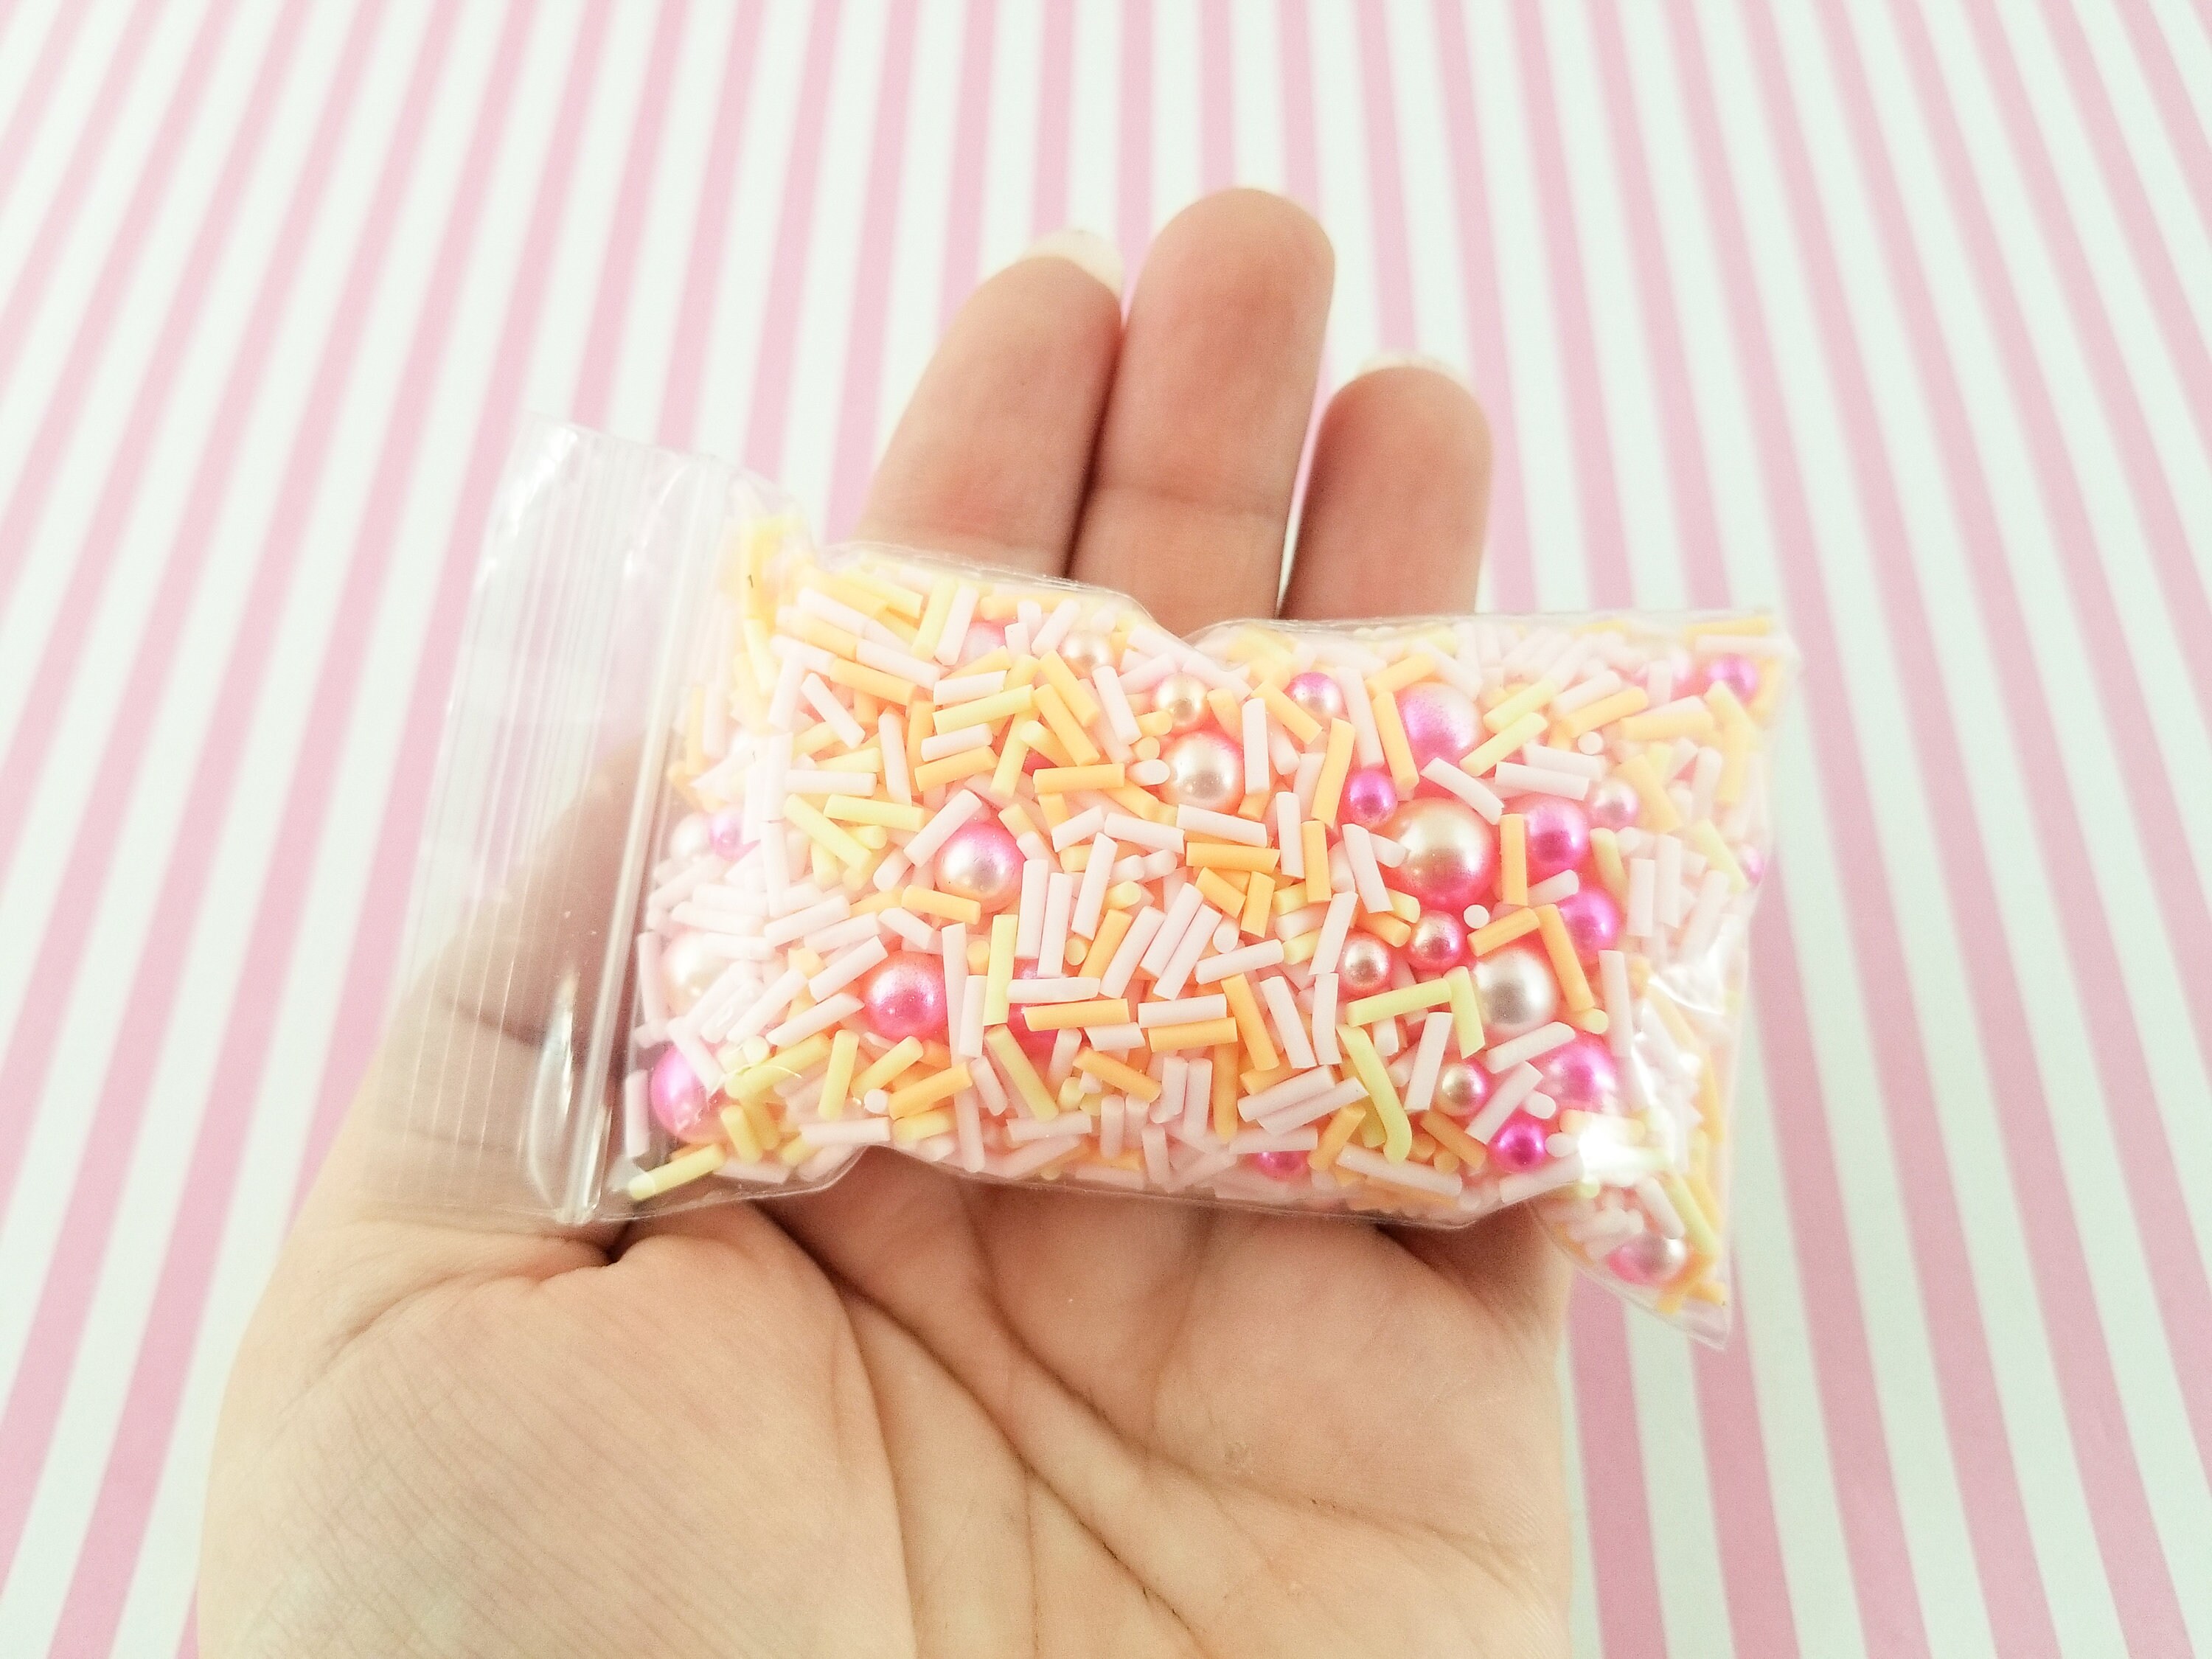 90's Child Bright Rainbow Polymer Clay Fake Sprinkles With White Star  Sprinkles, Decoden Funfetti Jimmies E10 